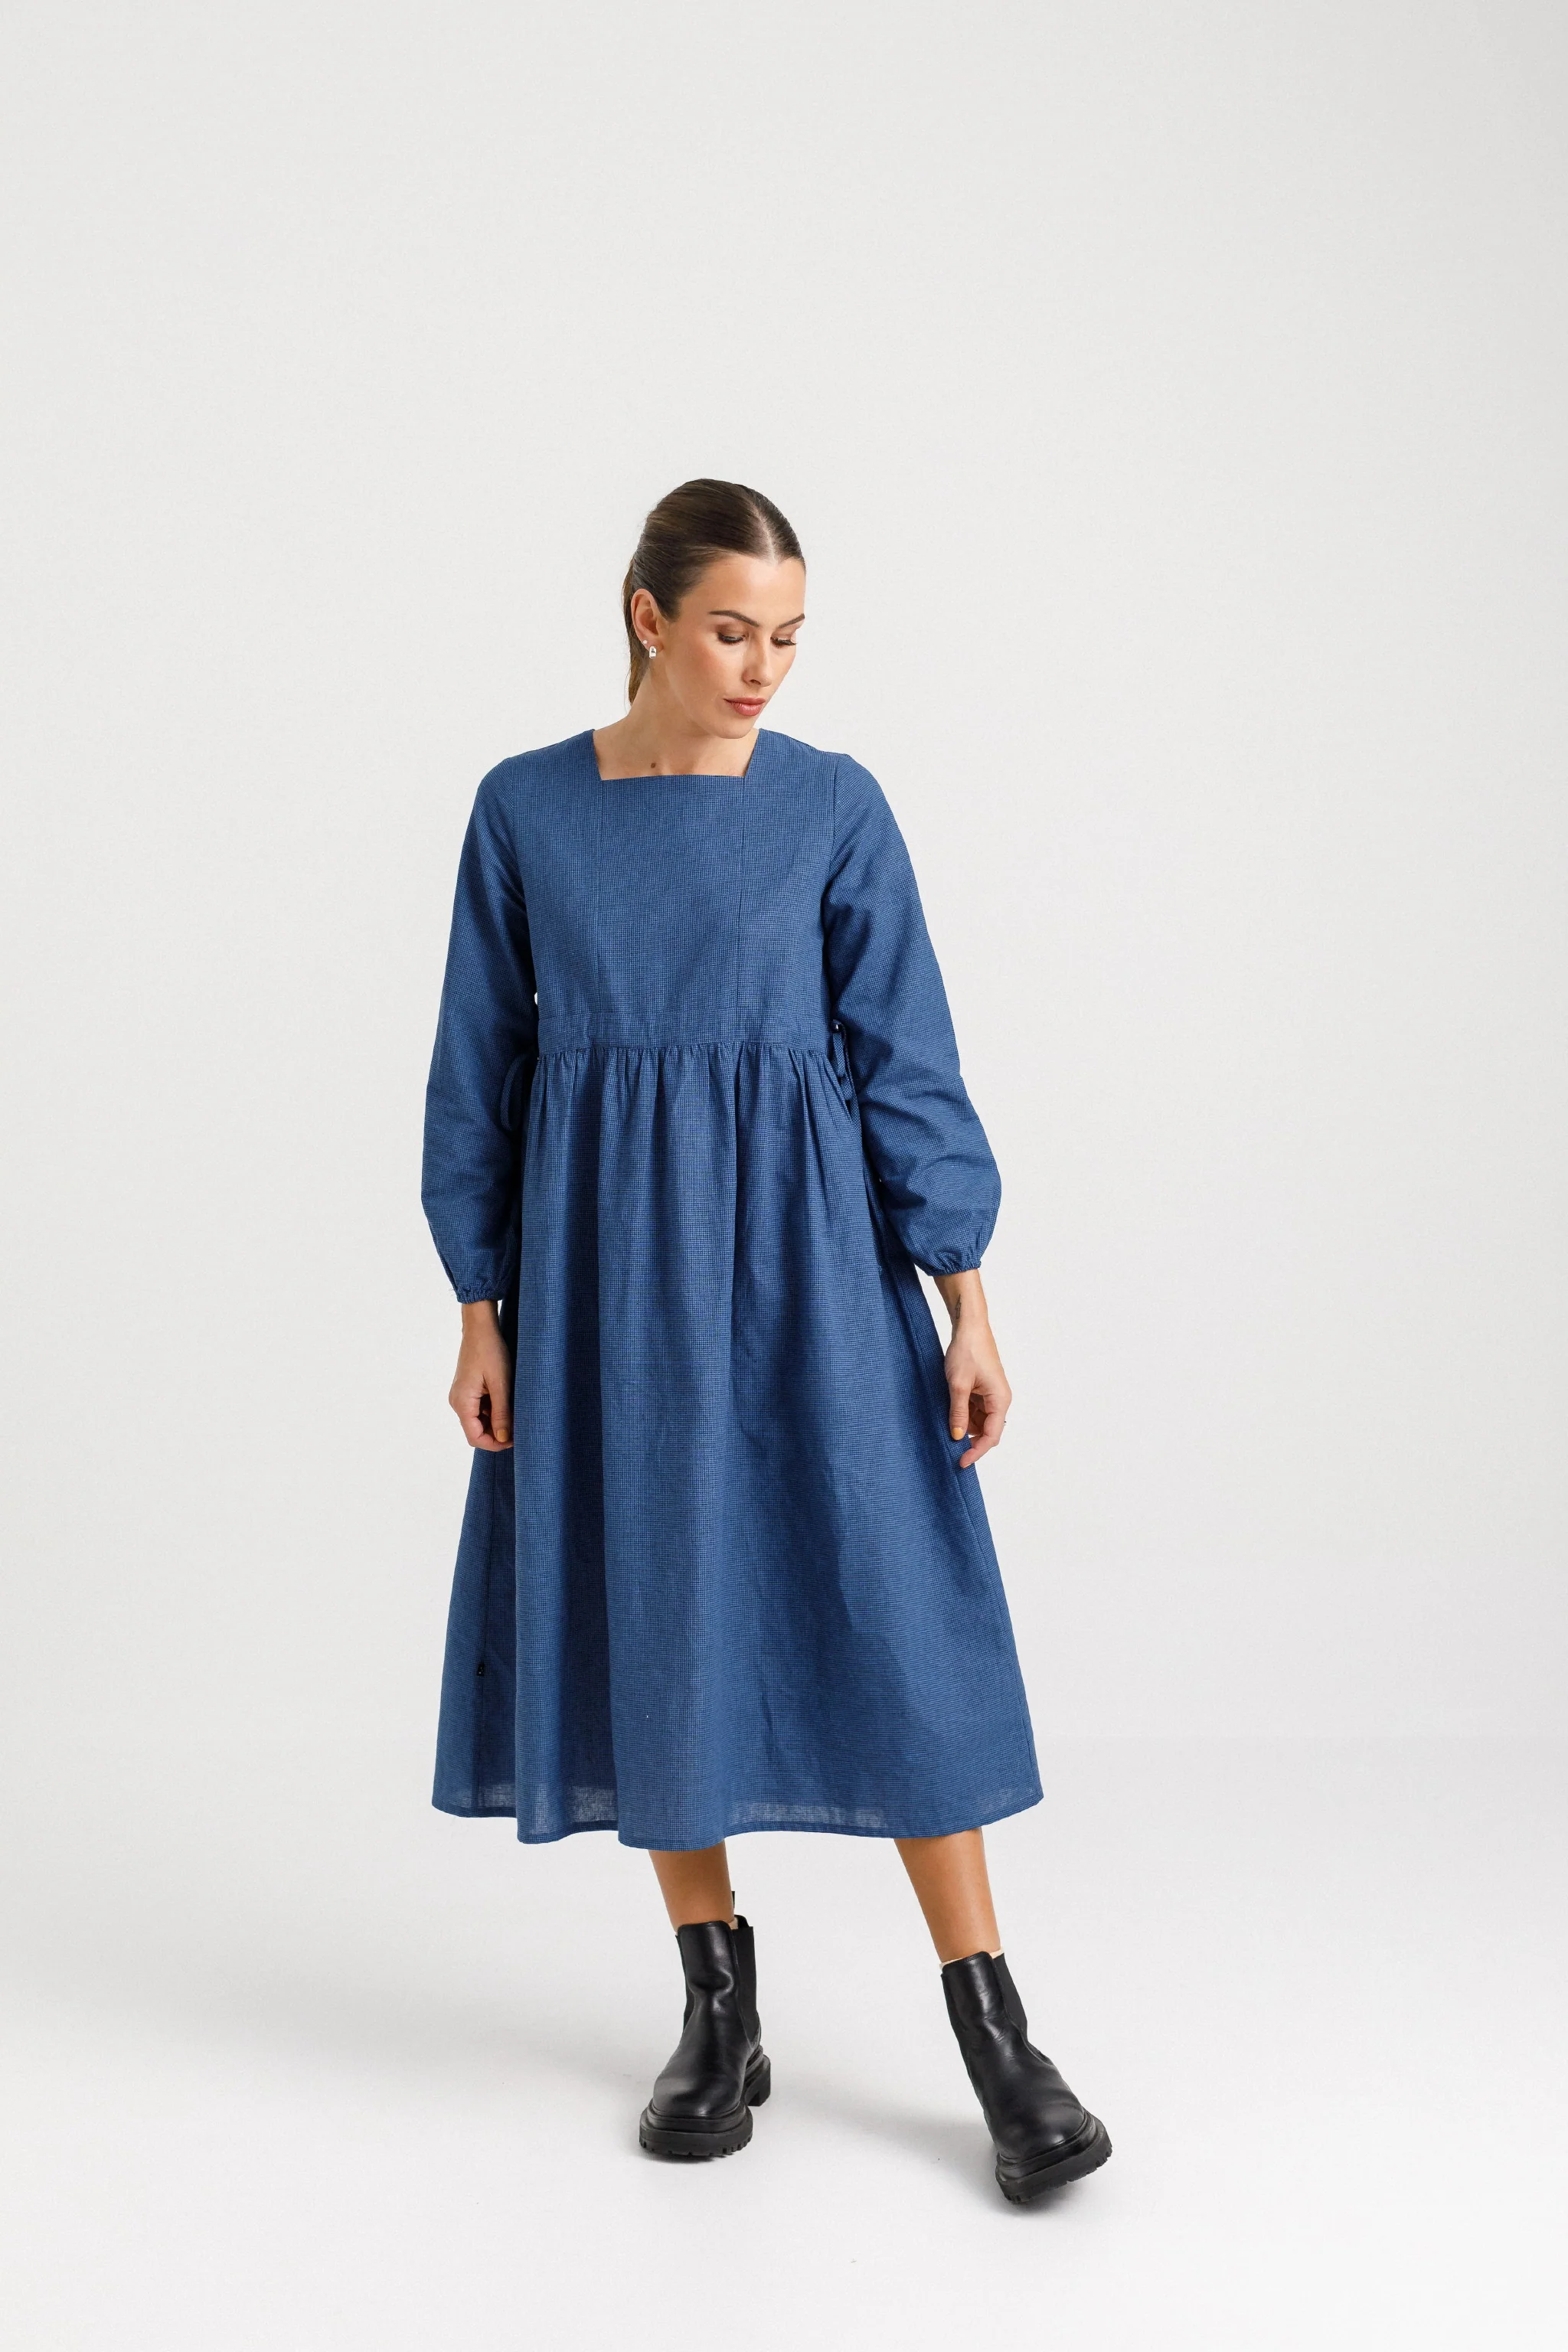 Coming Soon - Nellie Dress - Night Blue